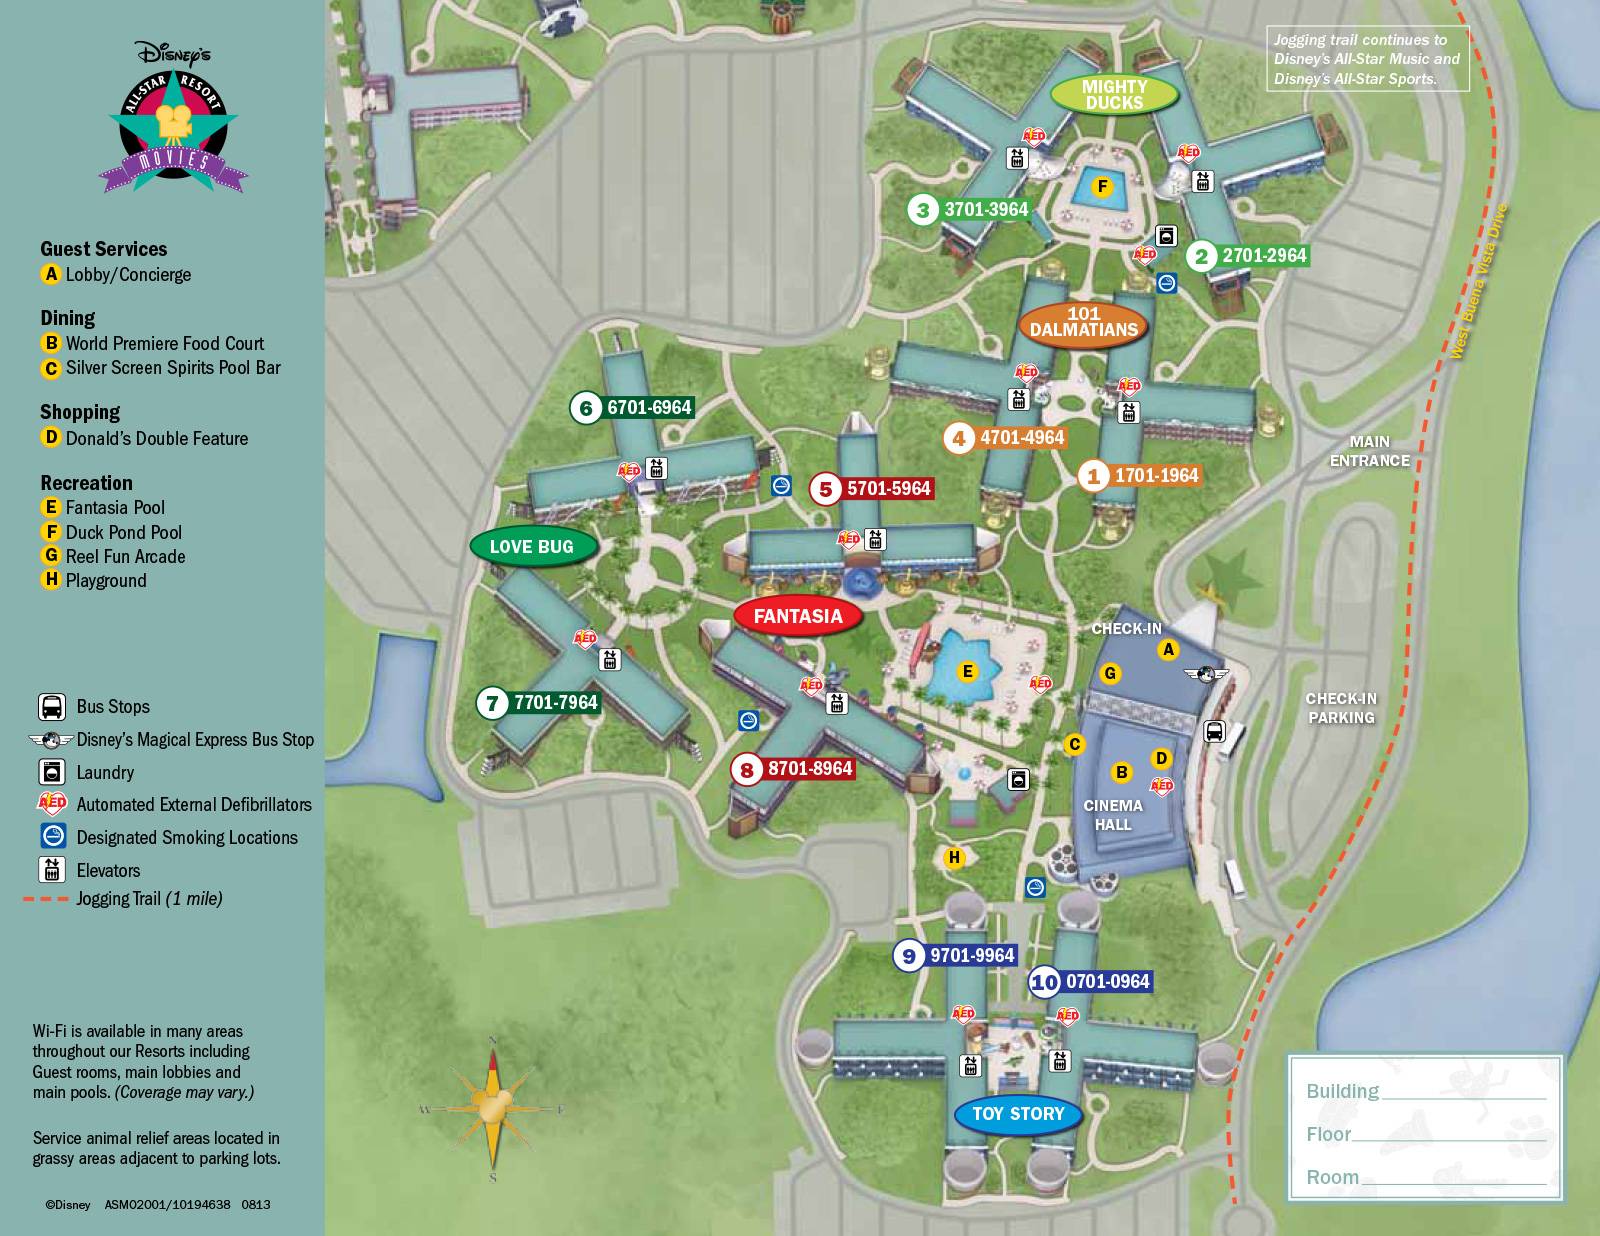 New 2013 All Star Movies Resort map